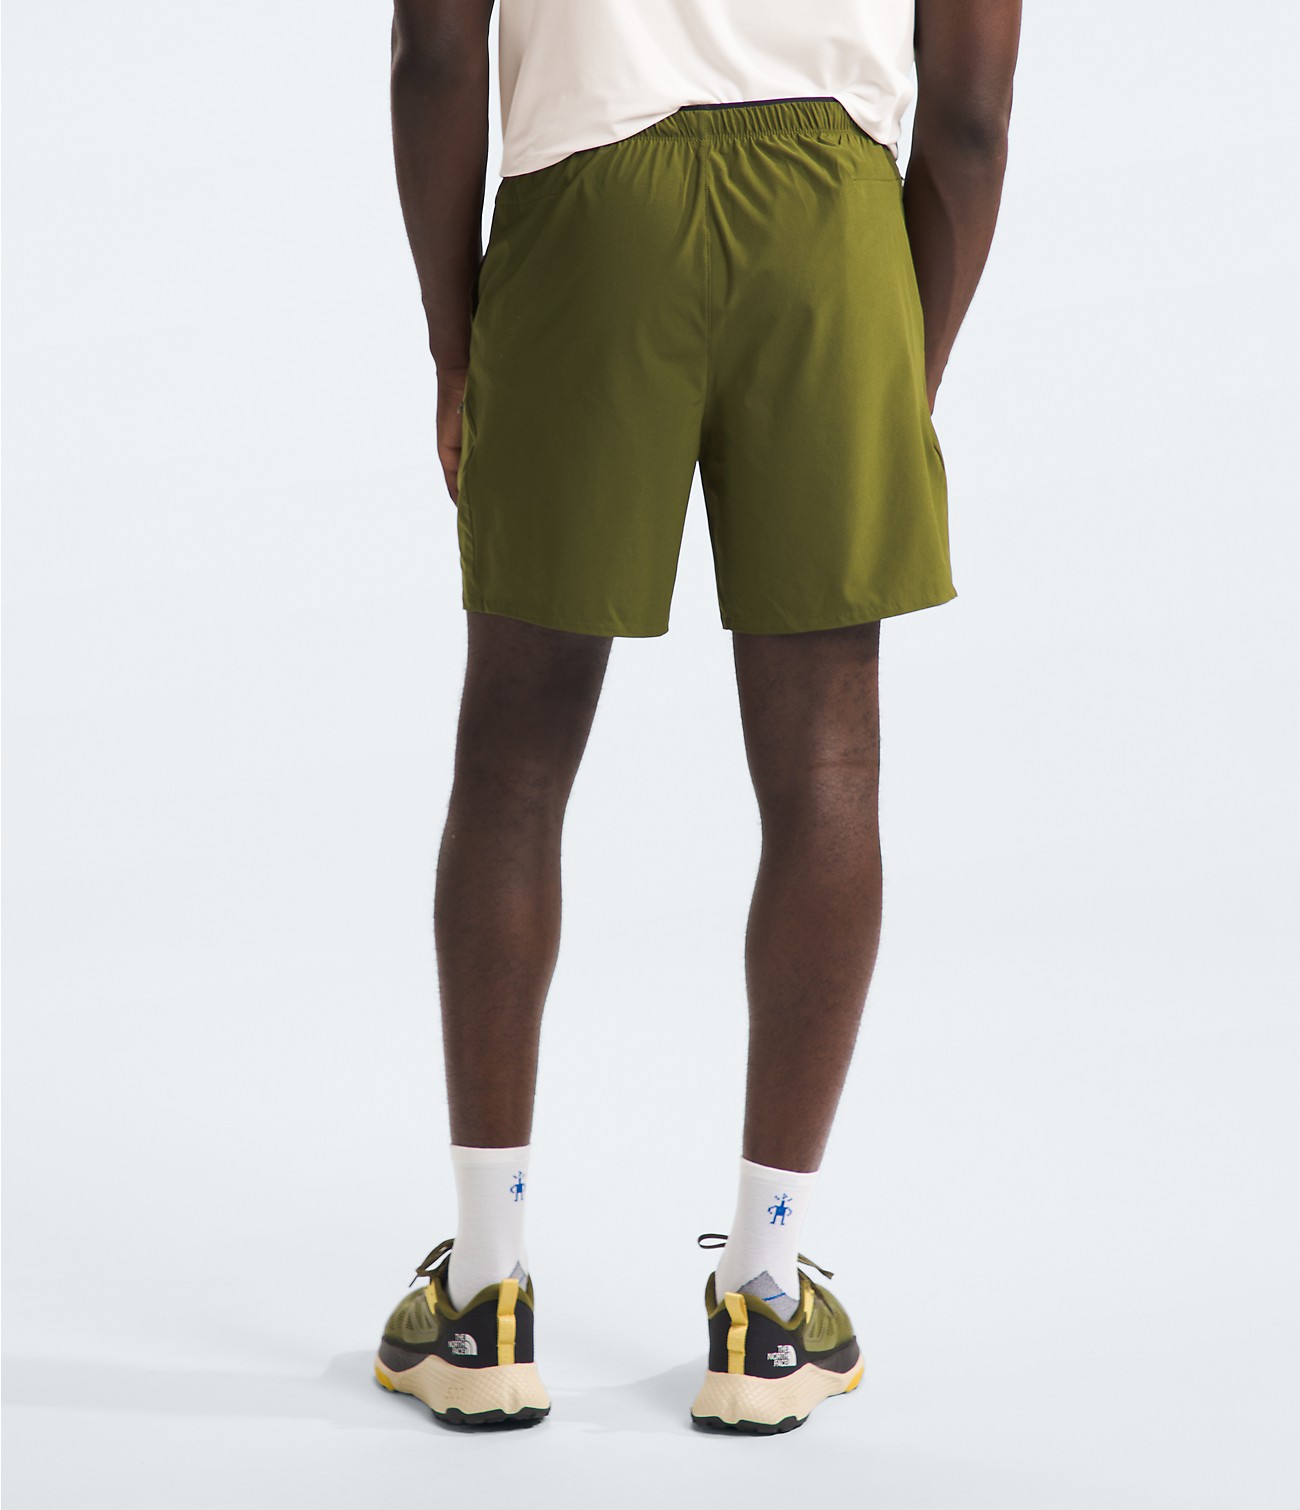 Men’s Lightstride Shorts | The North Face